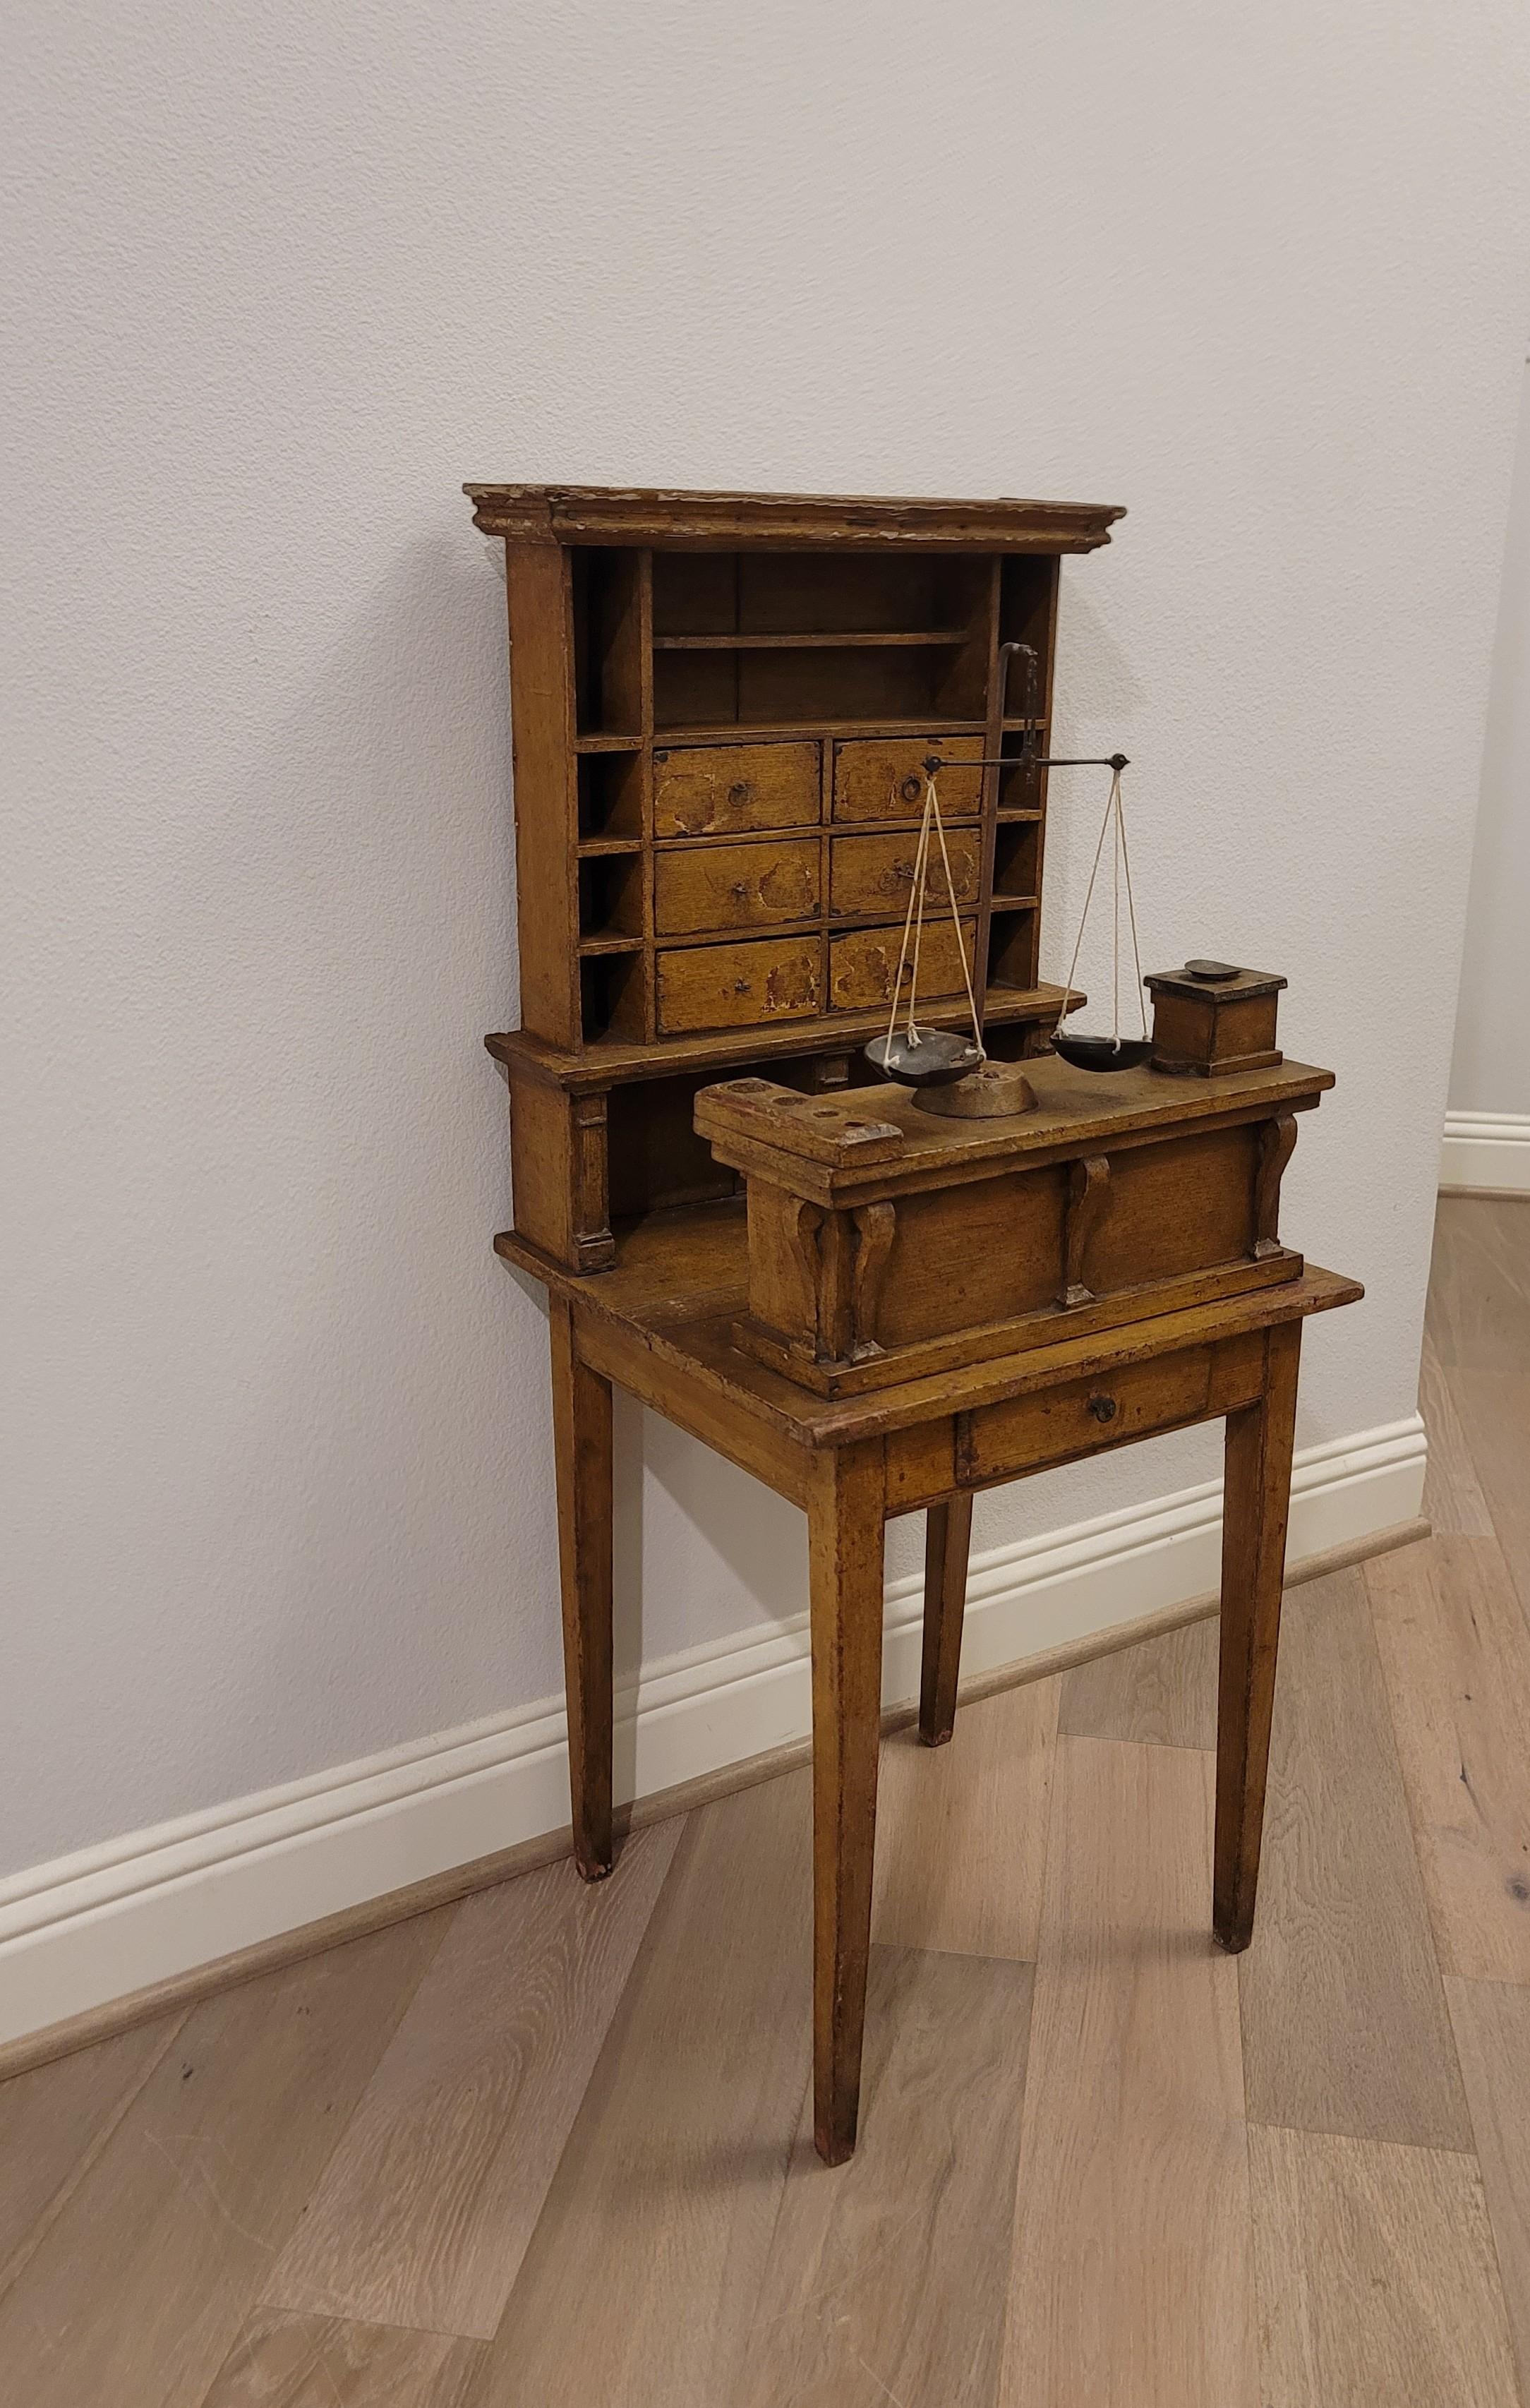 Diminutive 19th Century American Mercantile Trade Store Display Model In Good Condition For Sale In Forney, TX